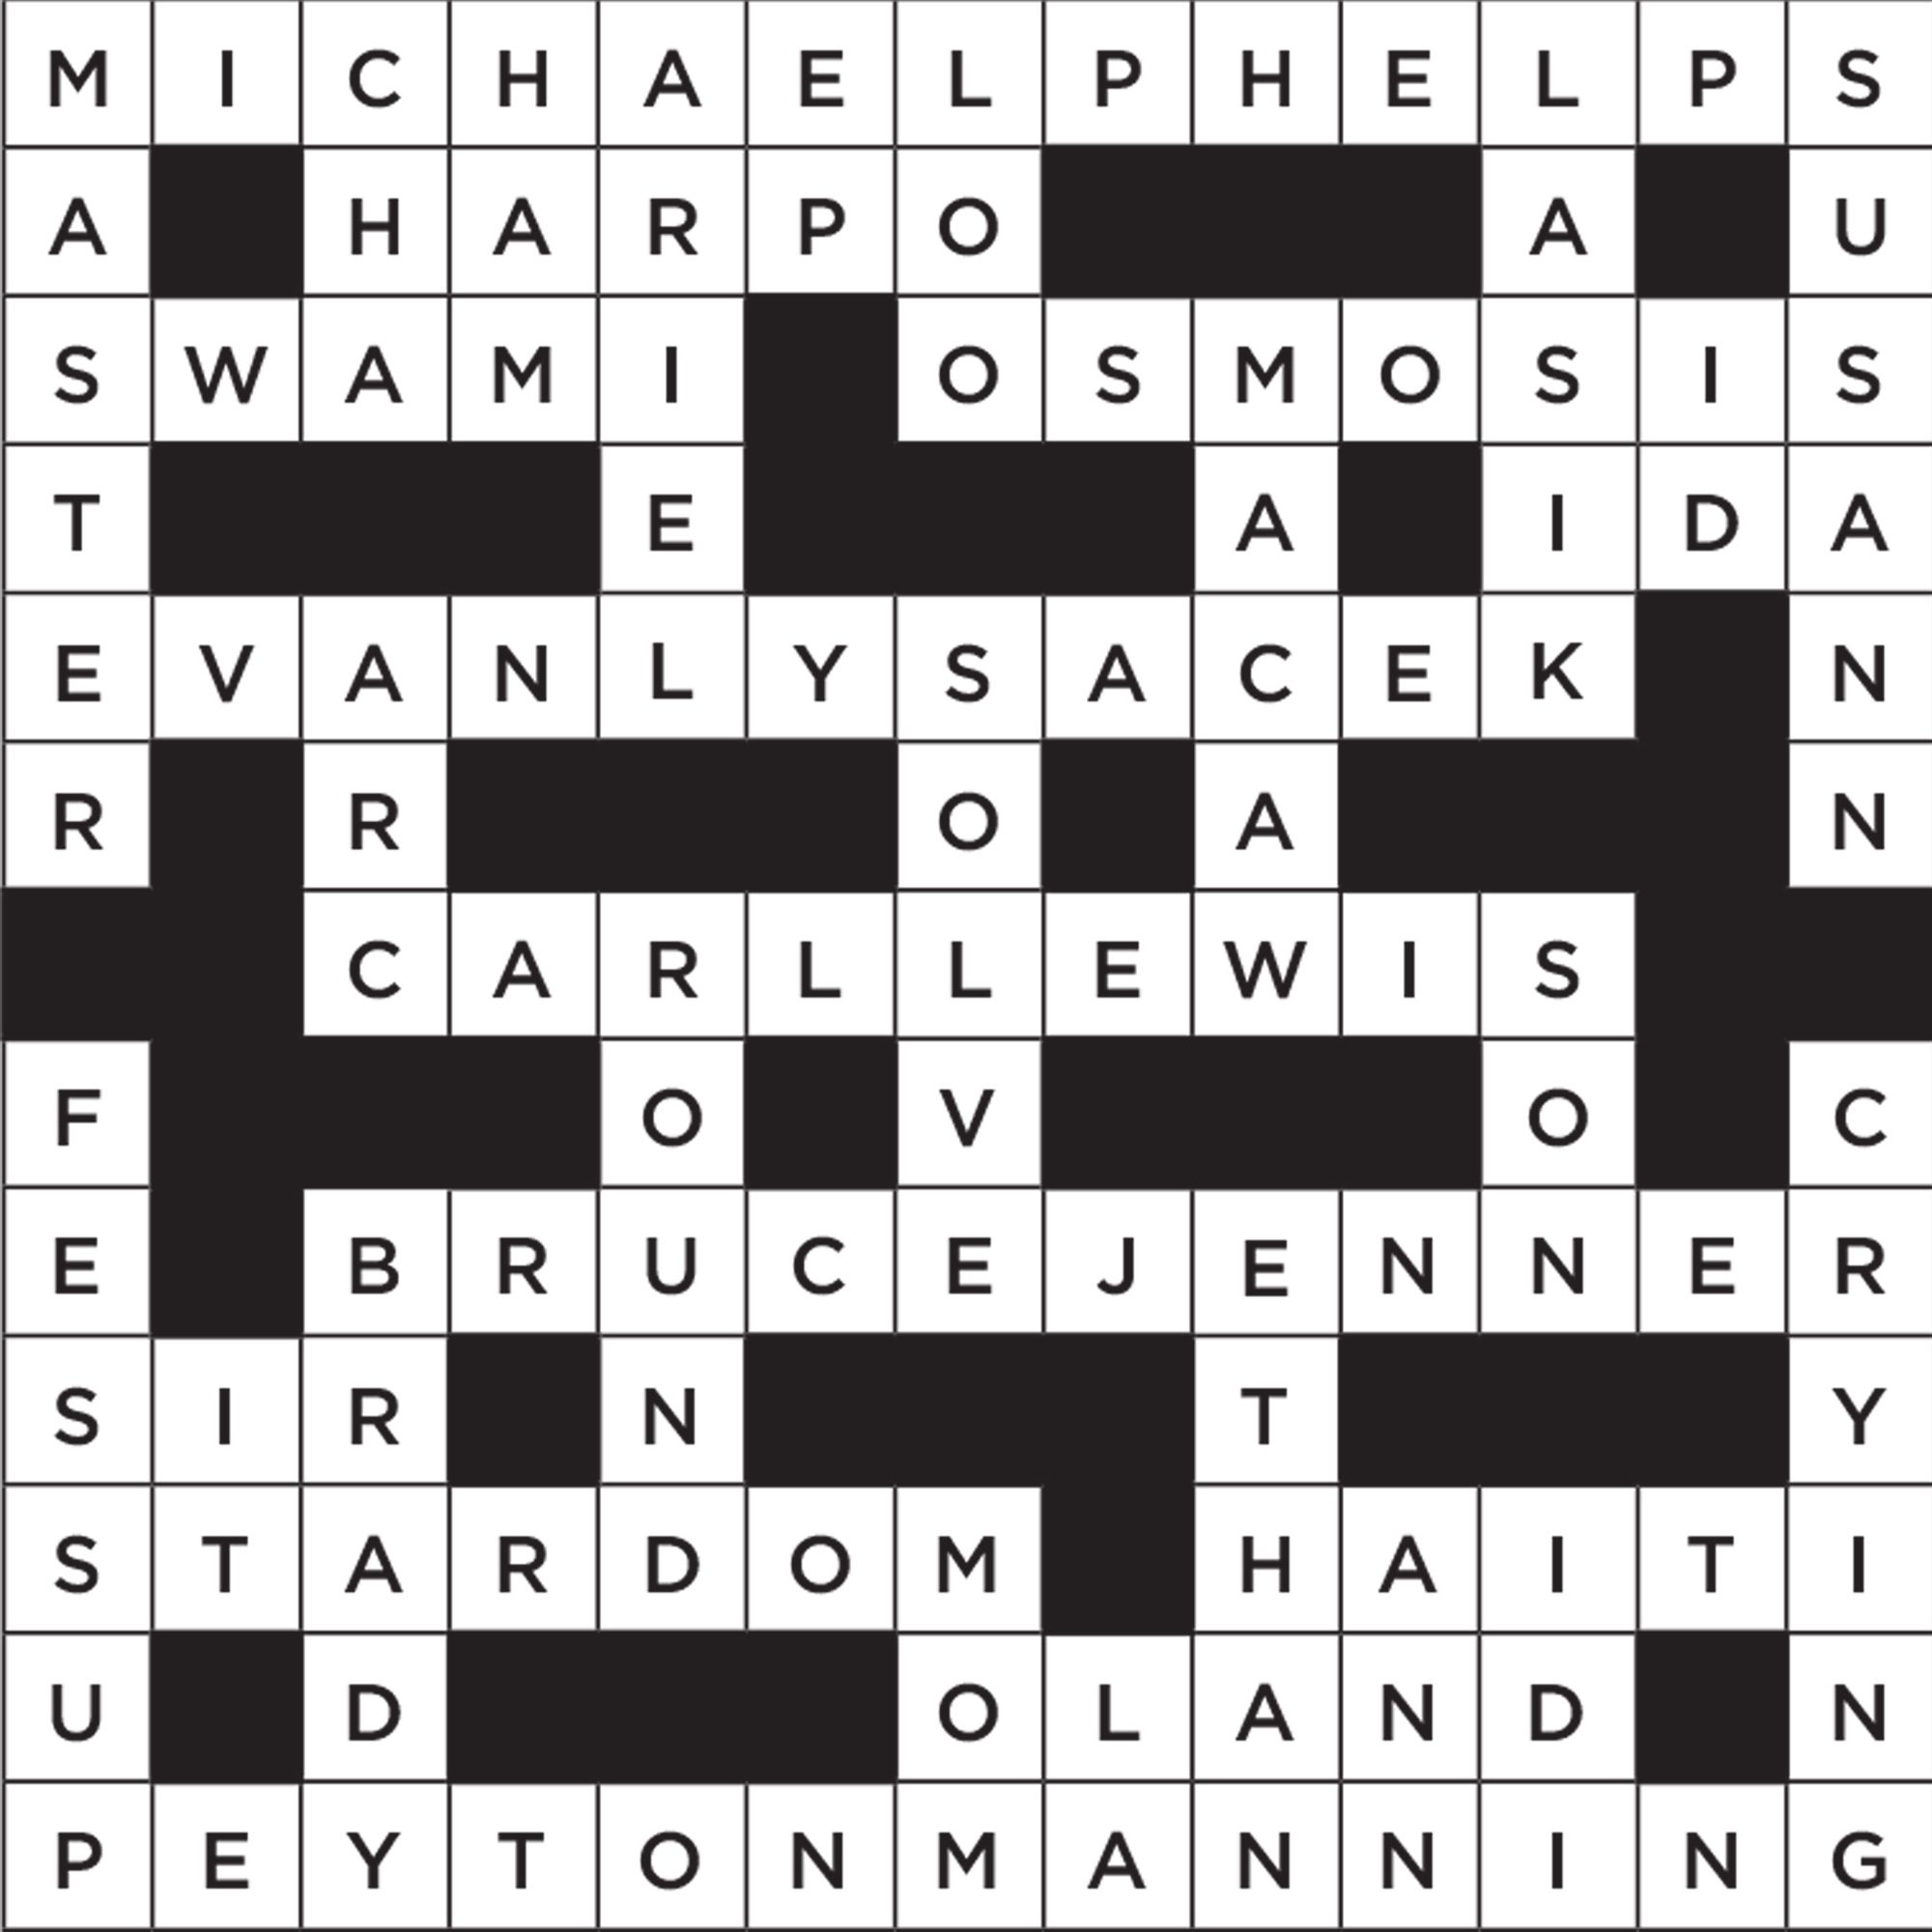 crossword-puzzles-printable-with-answers